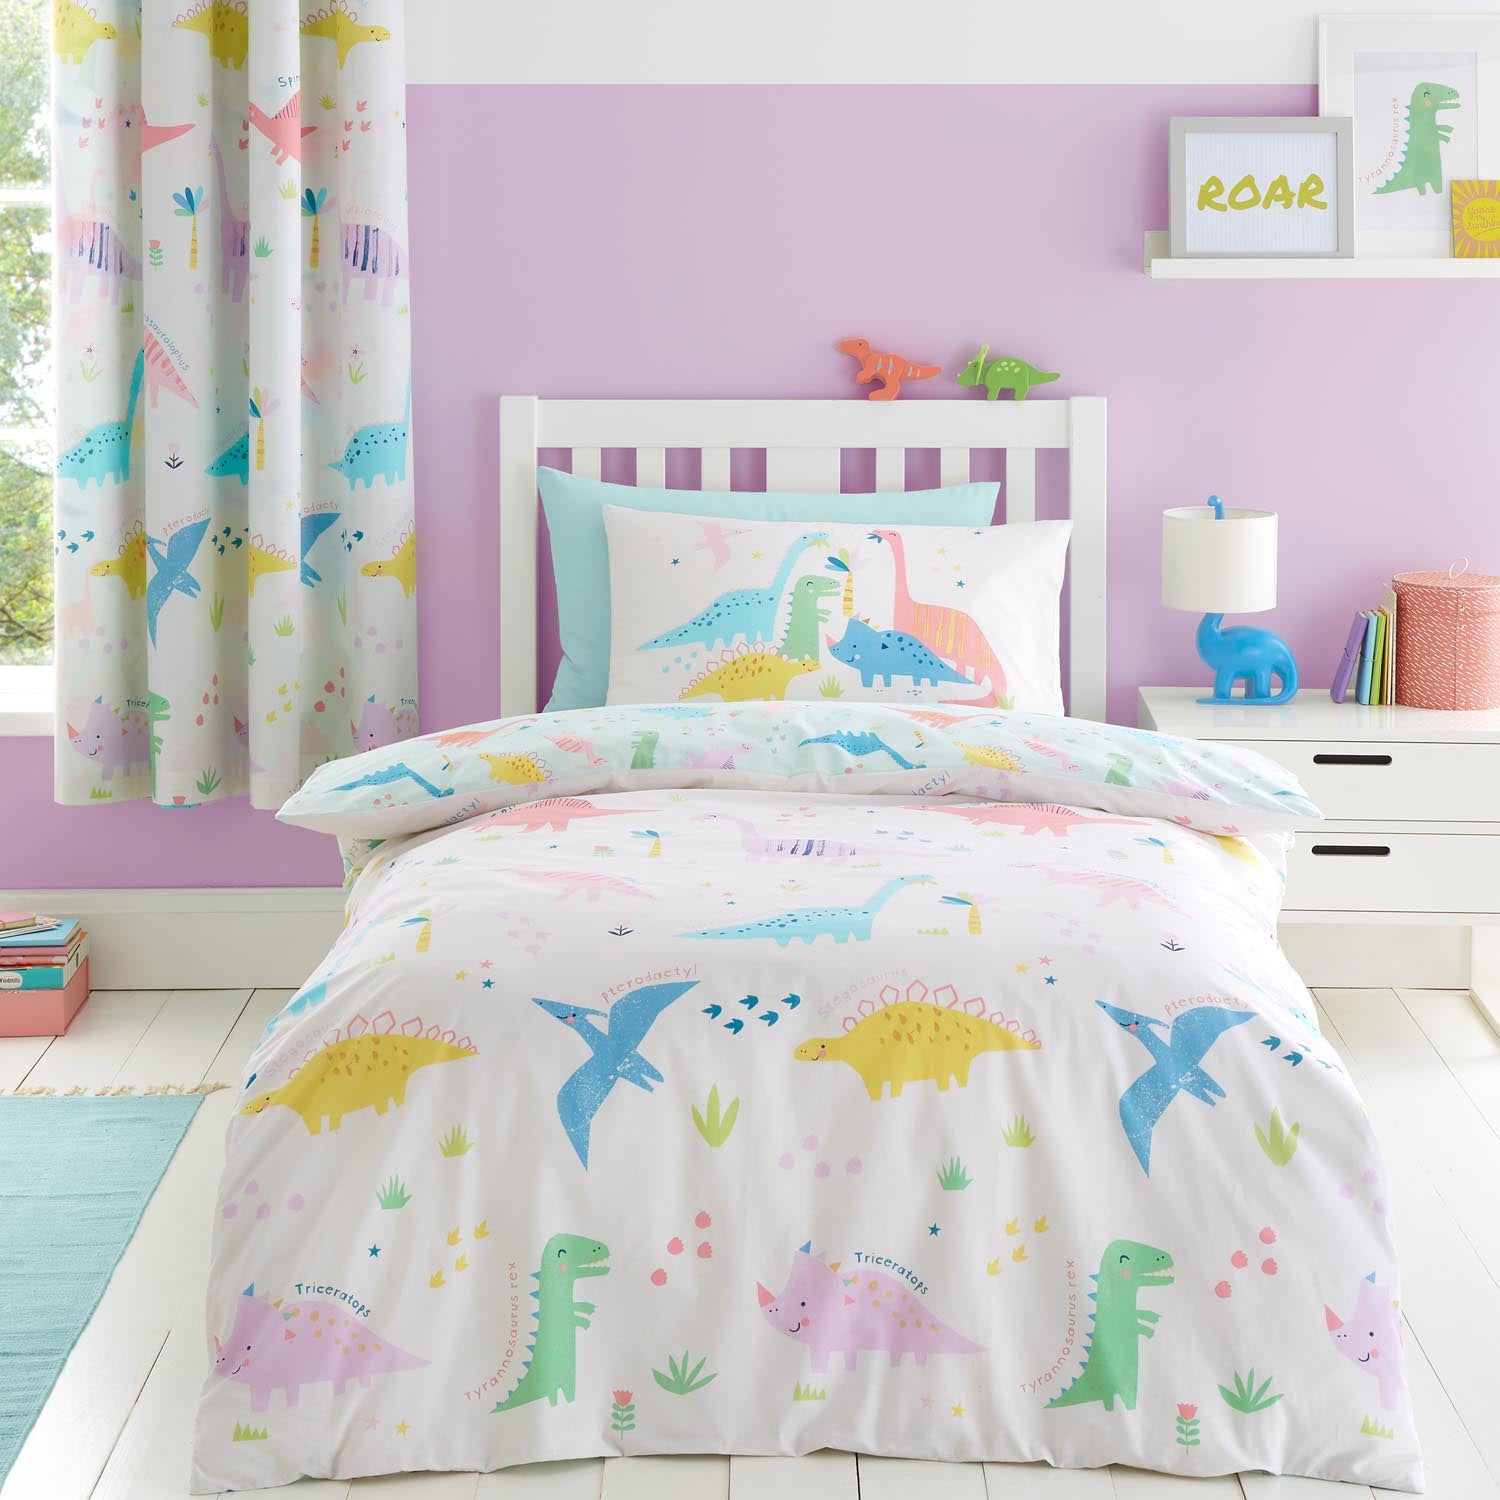 The Home Luxury Collection Loveable Dinosaur Duvet Cover 2 Shaws Department Stores